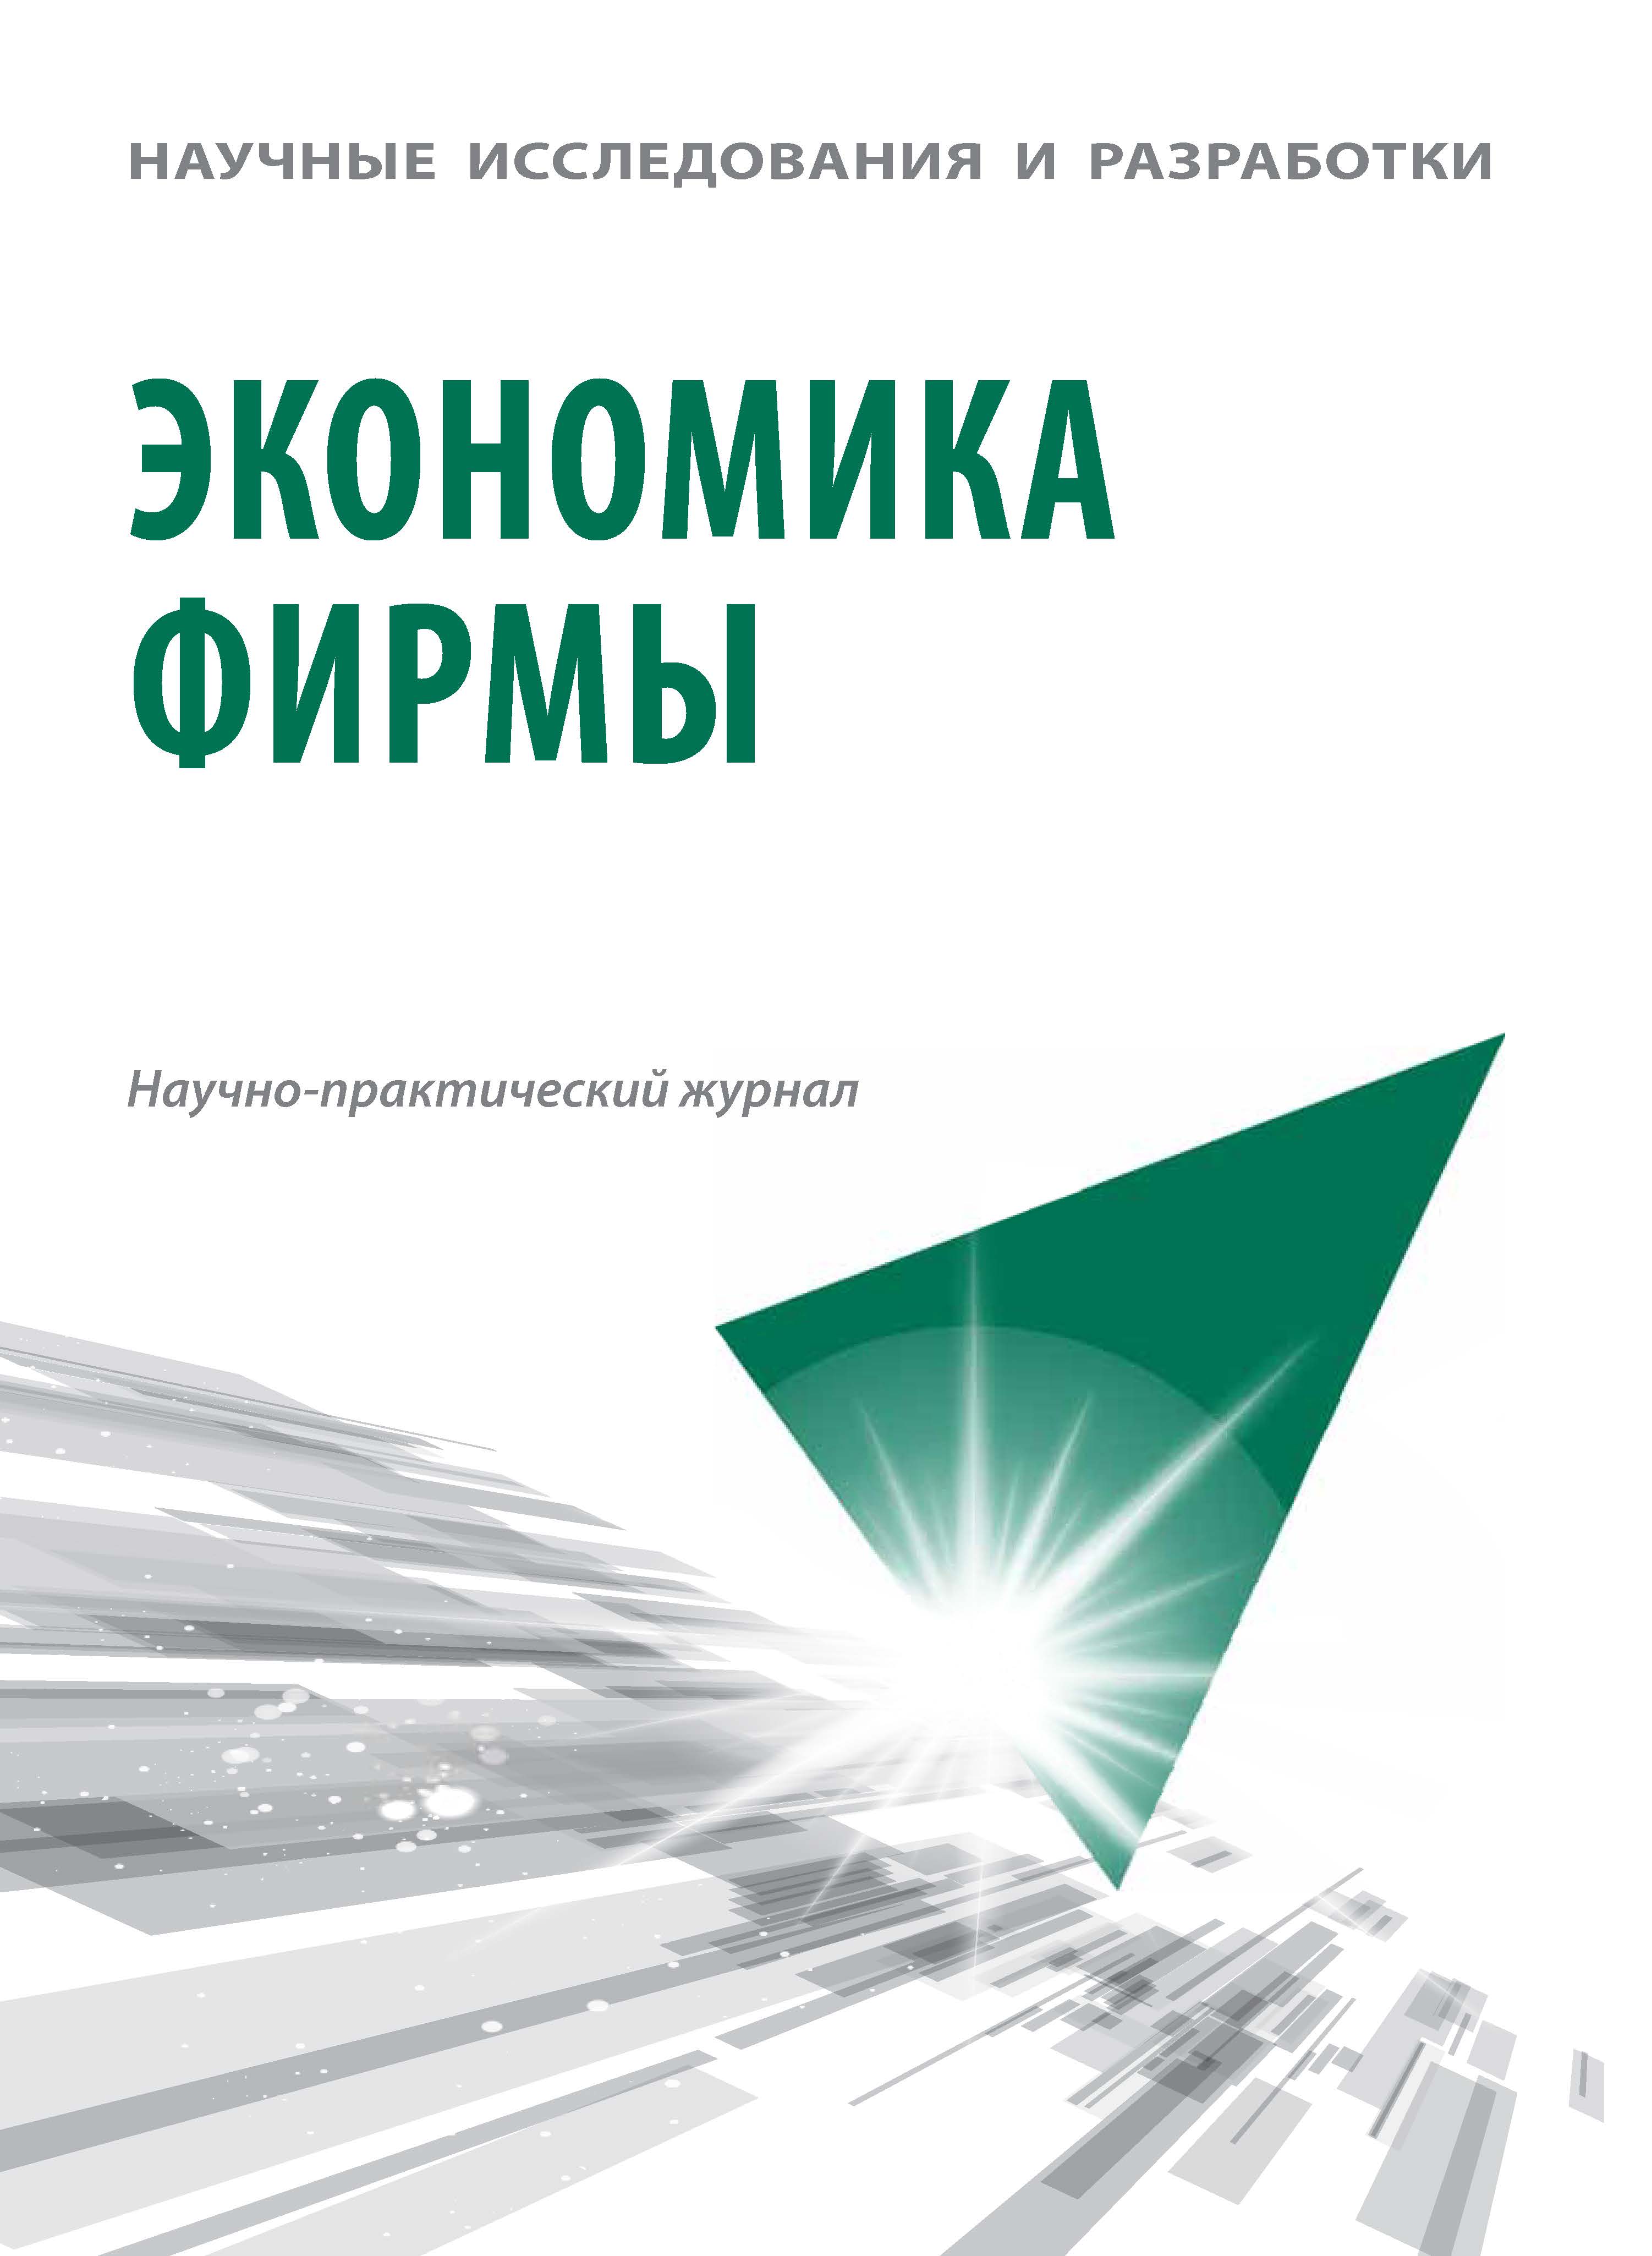                         Forecast and Development Prospects of the Russian Mortgage Market
            